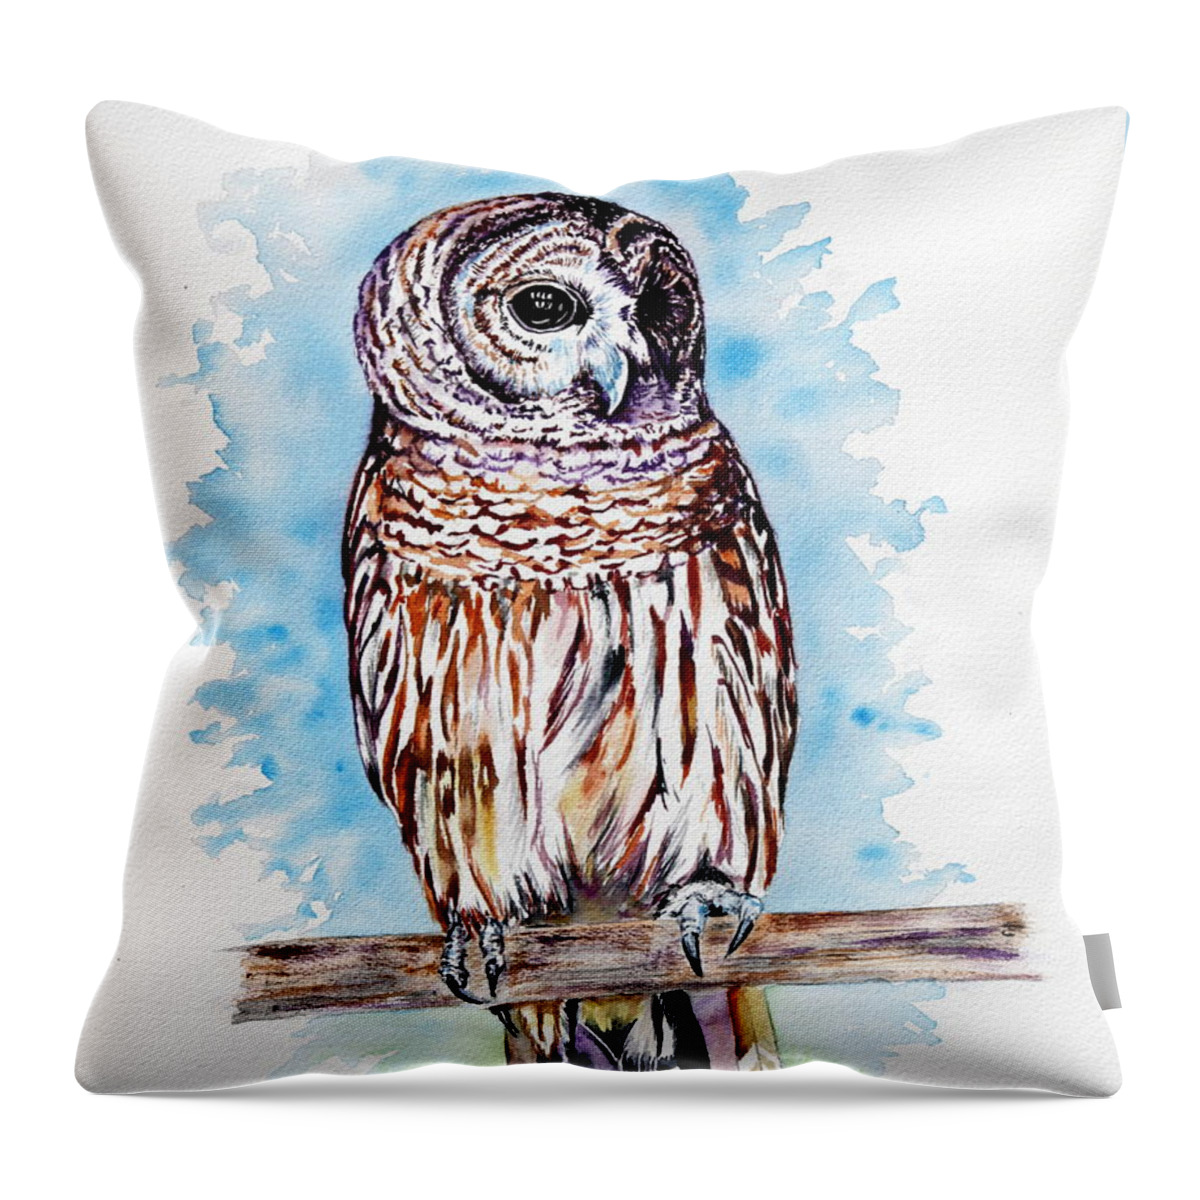 Owl Throw Pillow featuring the painting Archie by Maria Barry